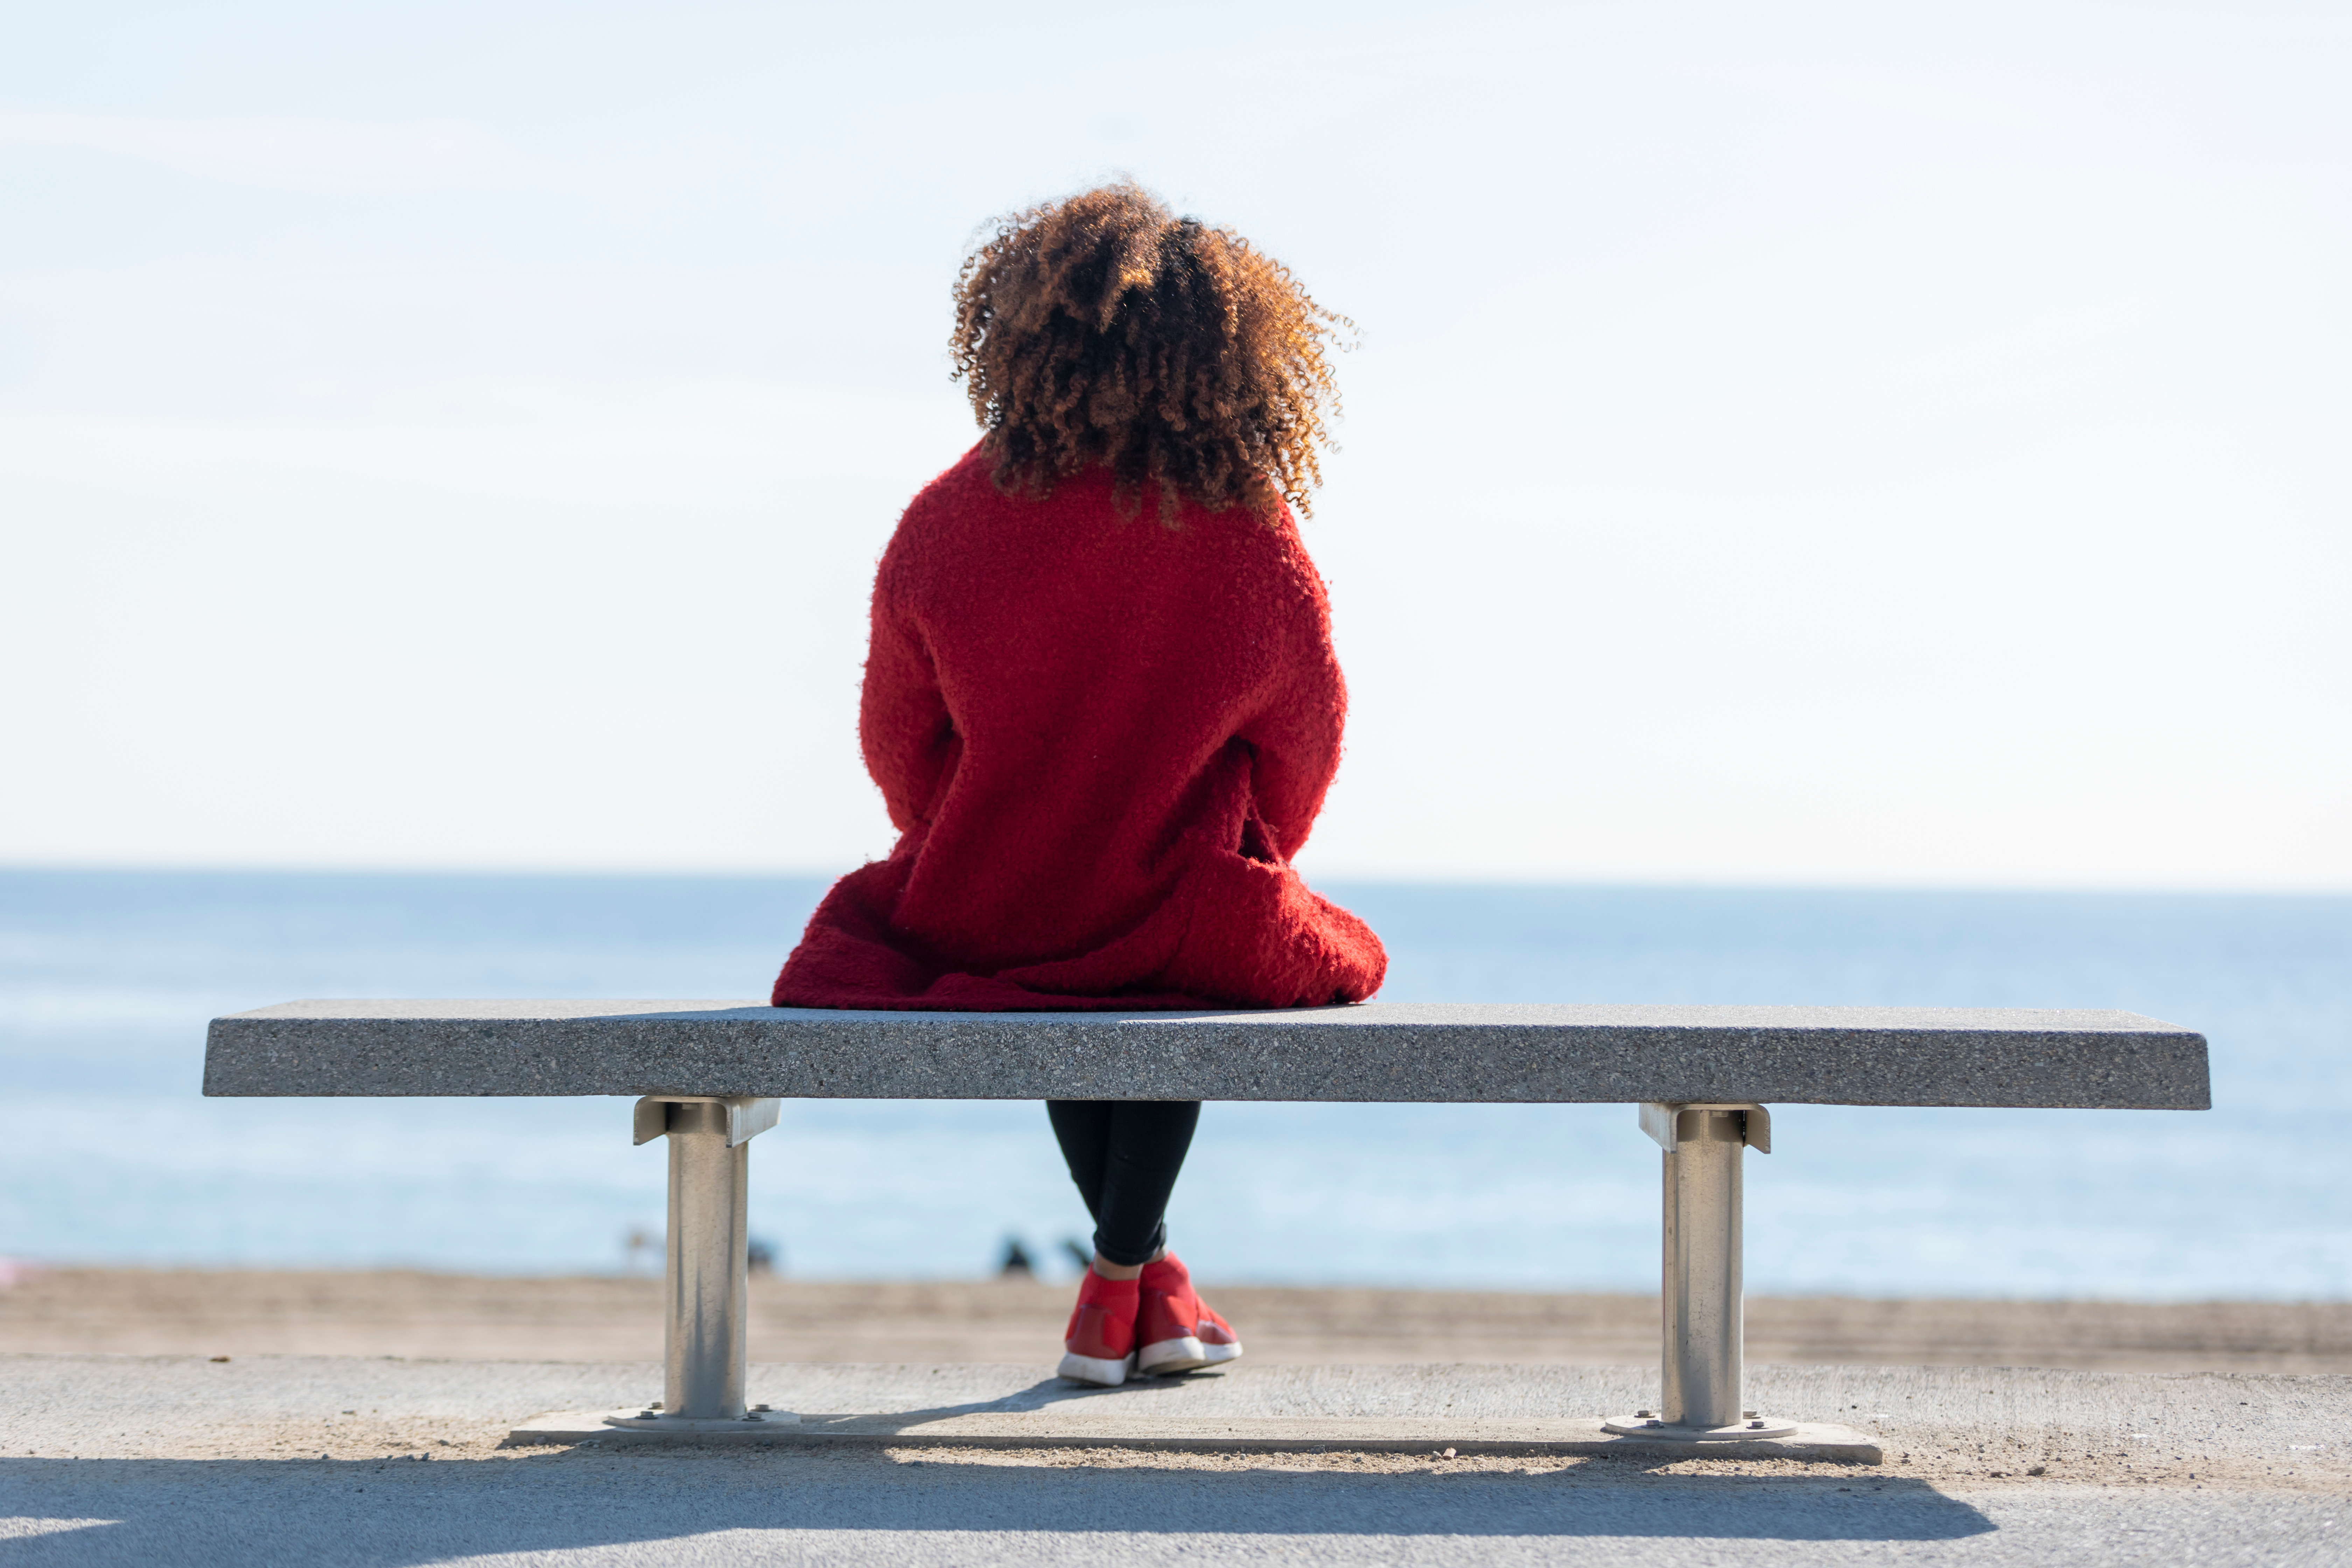 A person sitting on a bench struggling with symptoms of eczema. If you are also experiencing eczema symptoms, contact Vida-Flo today for IV hydration treatment.